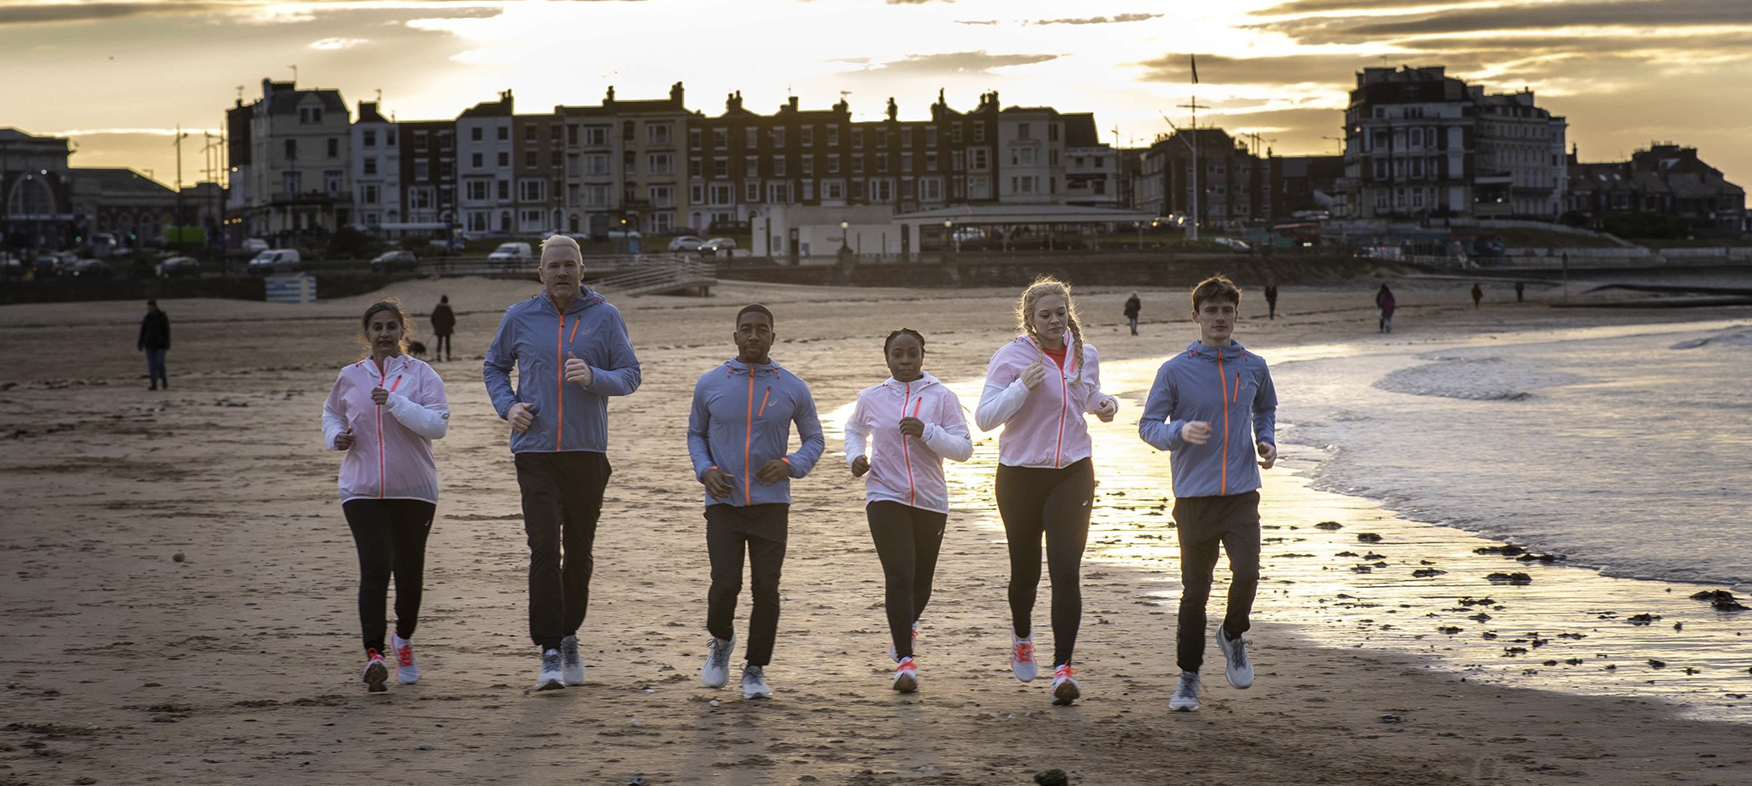 6 people jogging on a beach